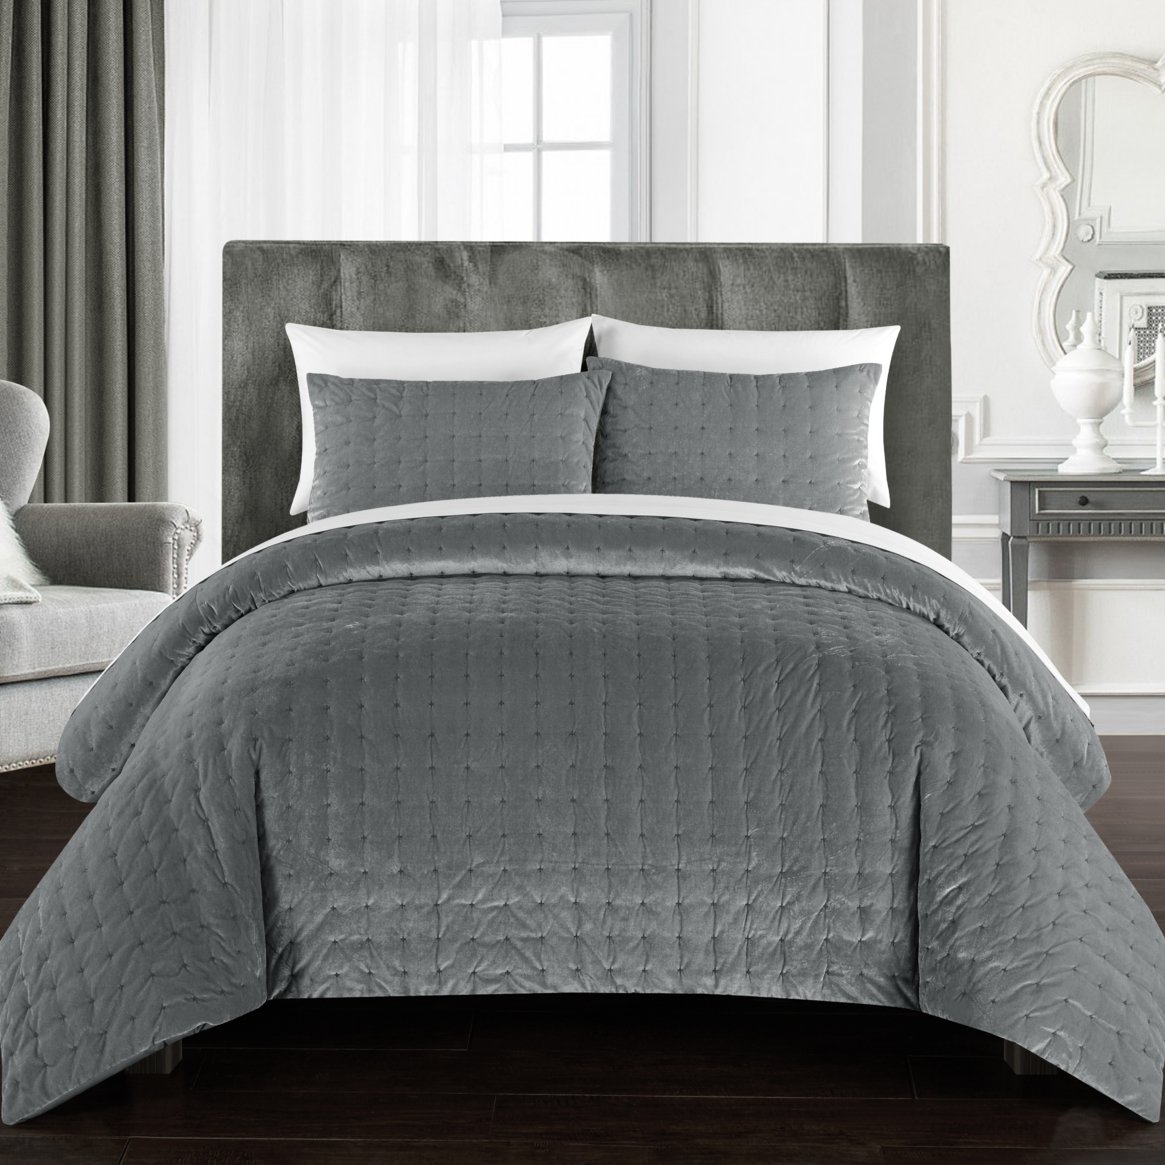 Chaya 7 Piece Comforter Set Luxurious Hand Stitched Velvet Bed In A Bag Bedding - Grey, Queen